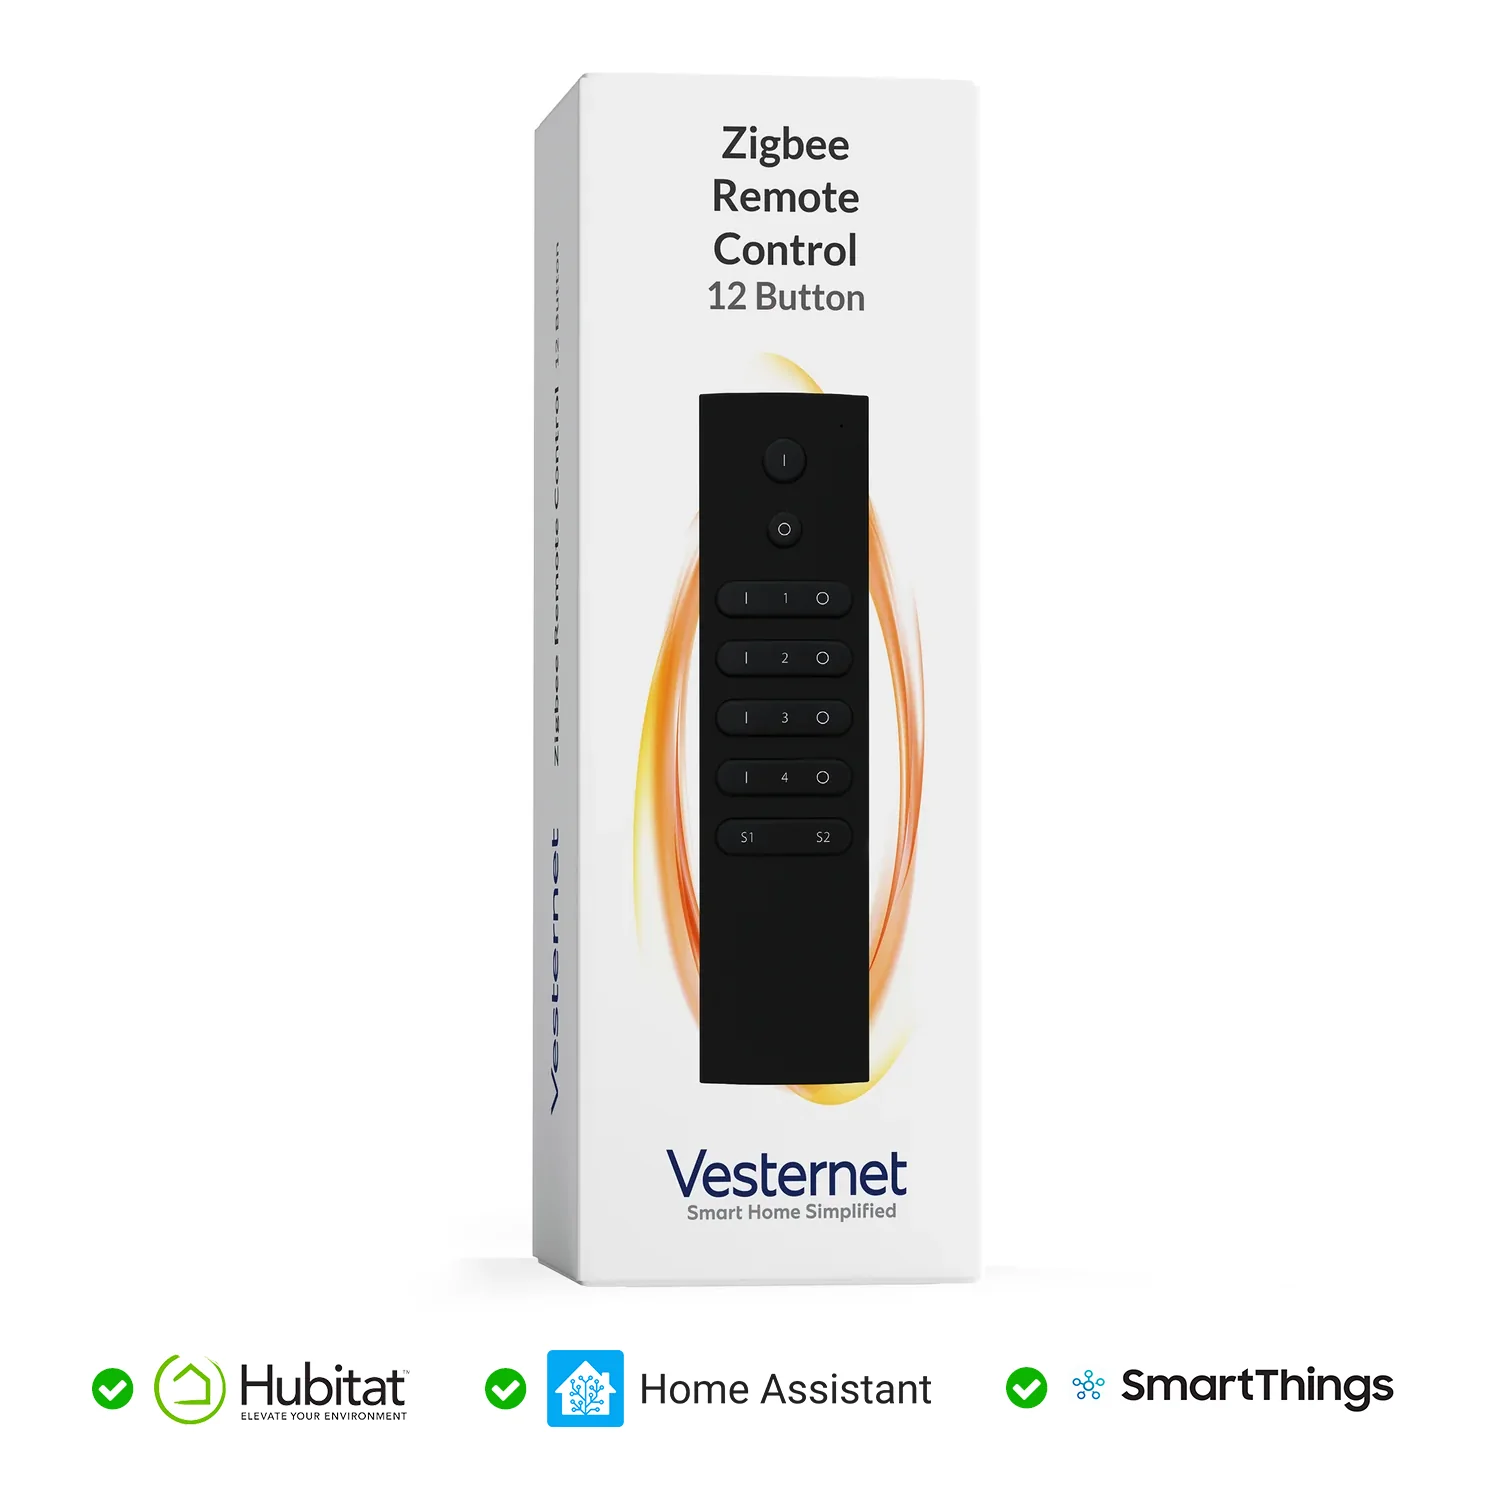 Vesternet Zigbee Remote Control - 12 Button Questions & Answers